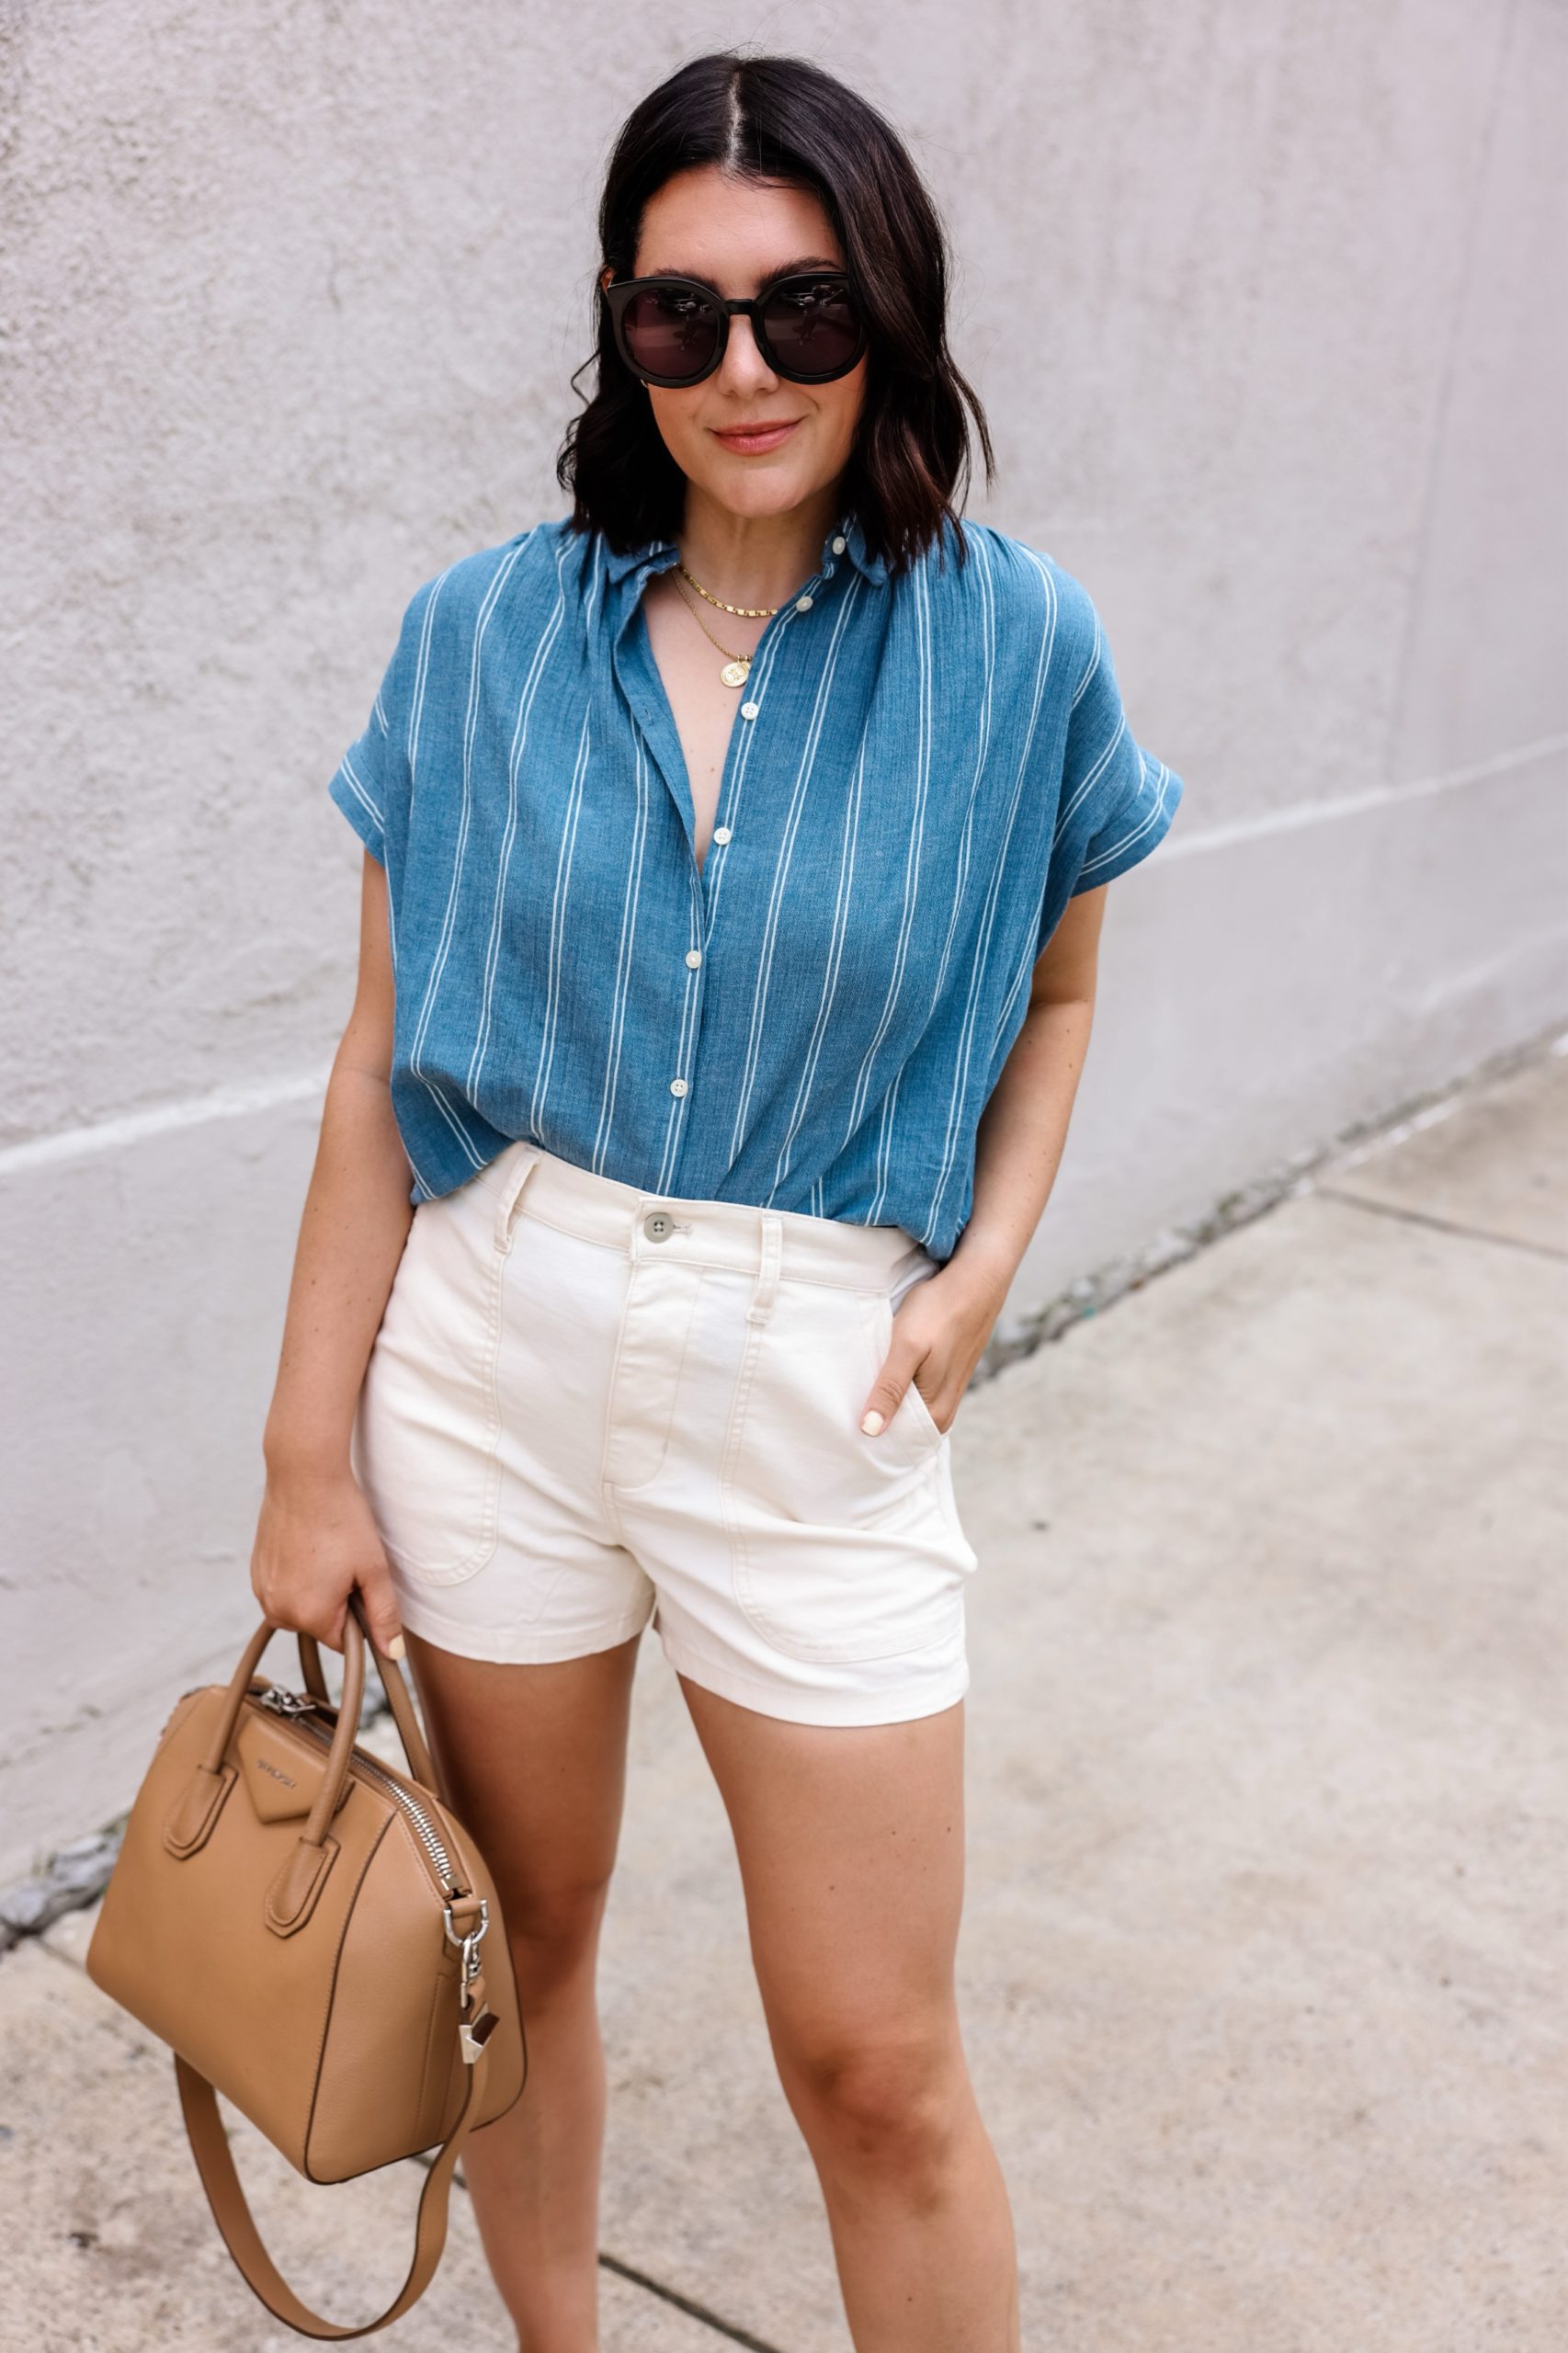 Kendi Everyday wearing Madewell Central Shirt and Madewell Utility  Shorts_04